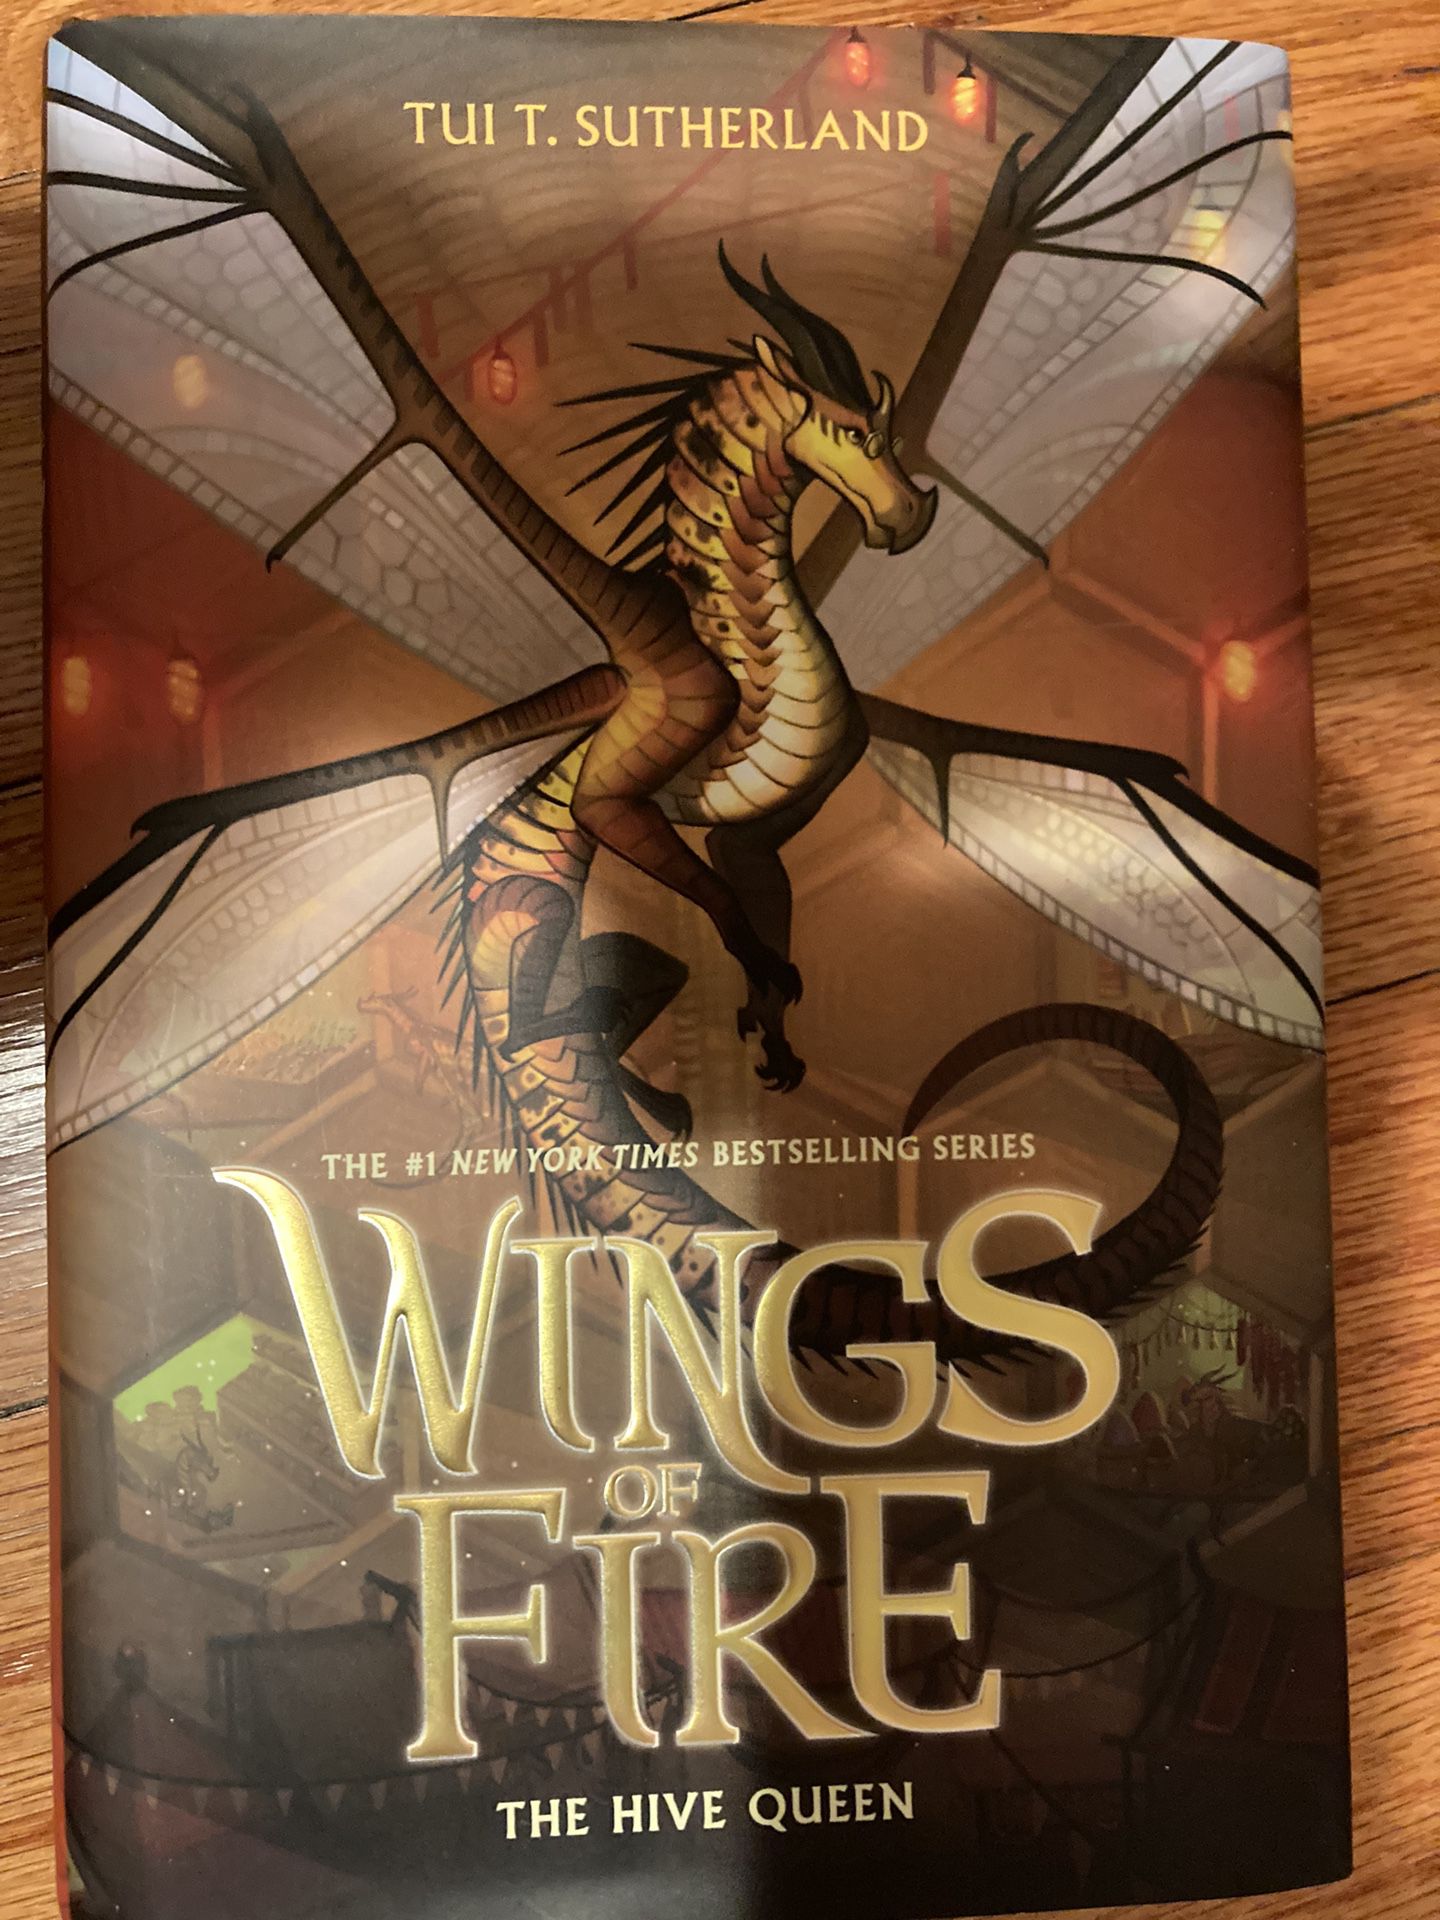 of　The　(Wings　Fire)　(12)　for　Sale　Diego,　in　San　CA　OfferUp　Hive　Queen